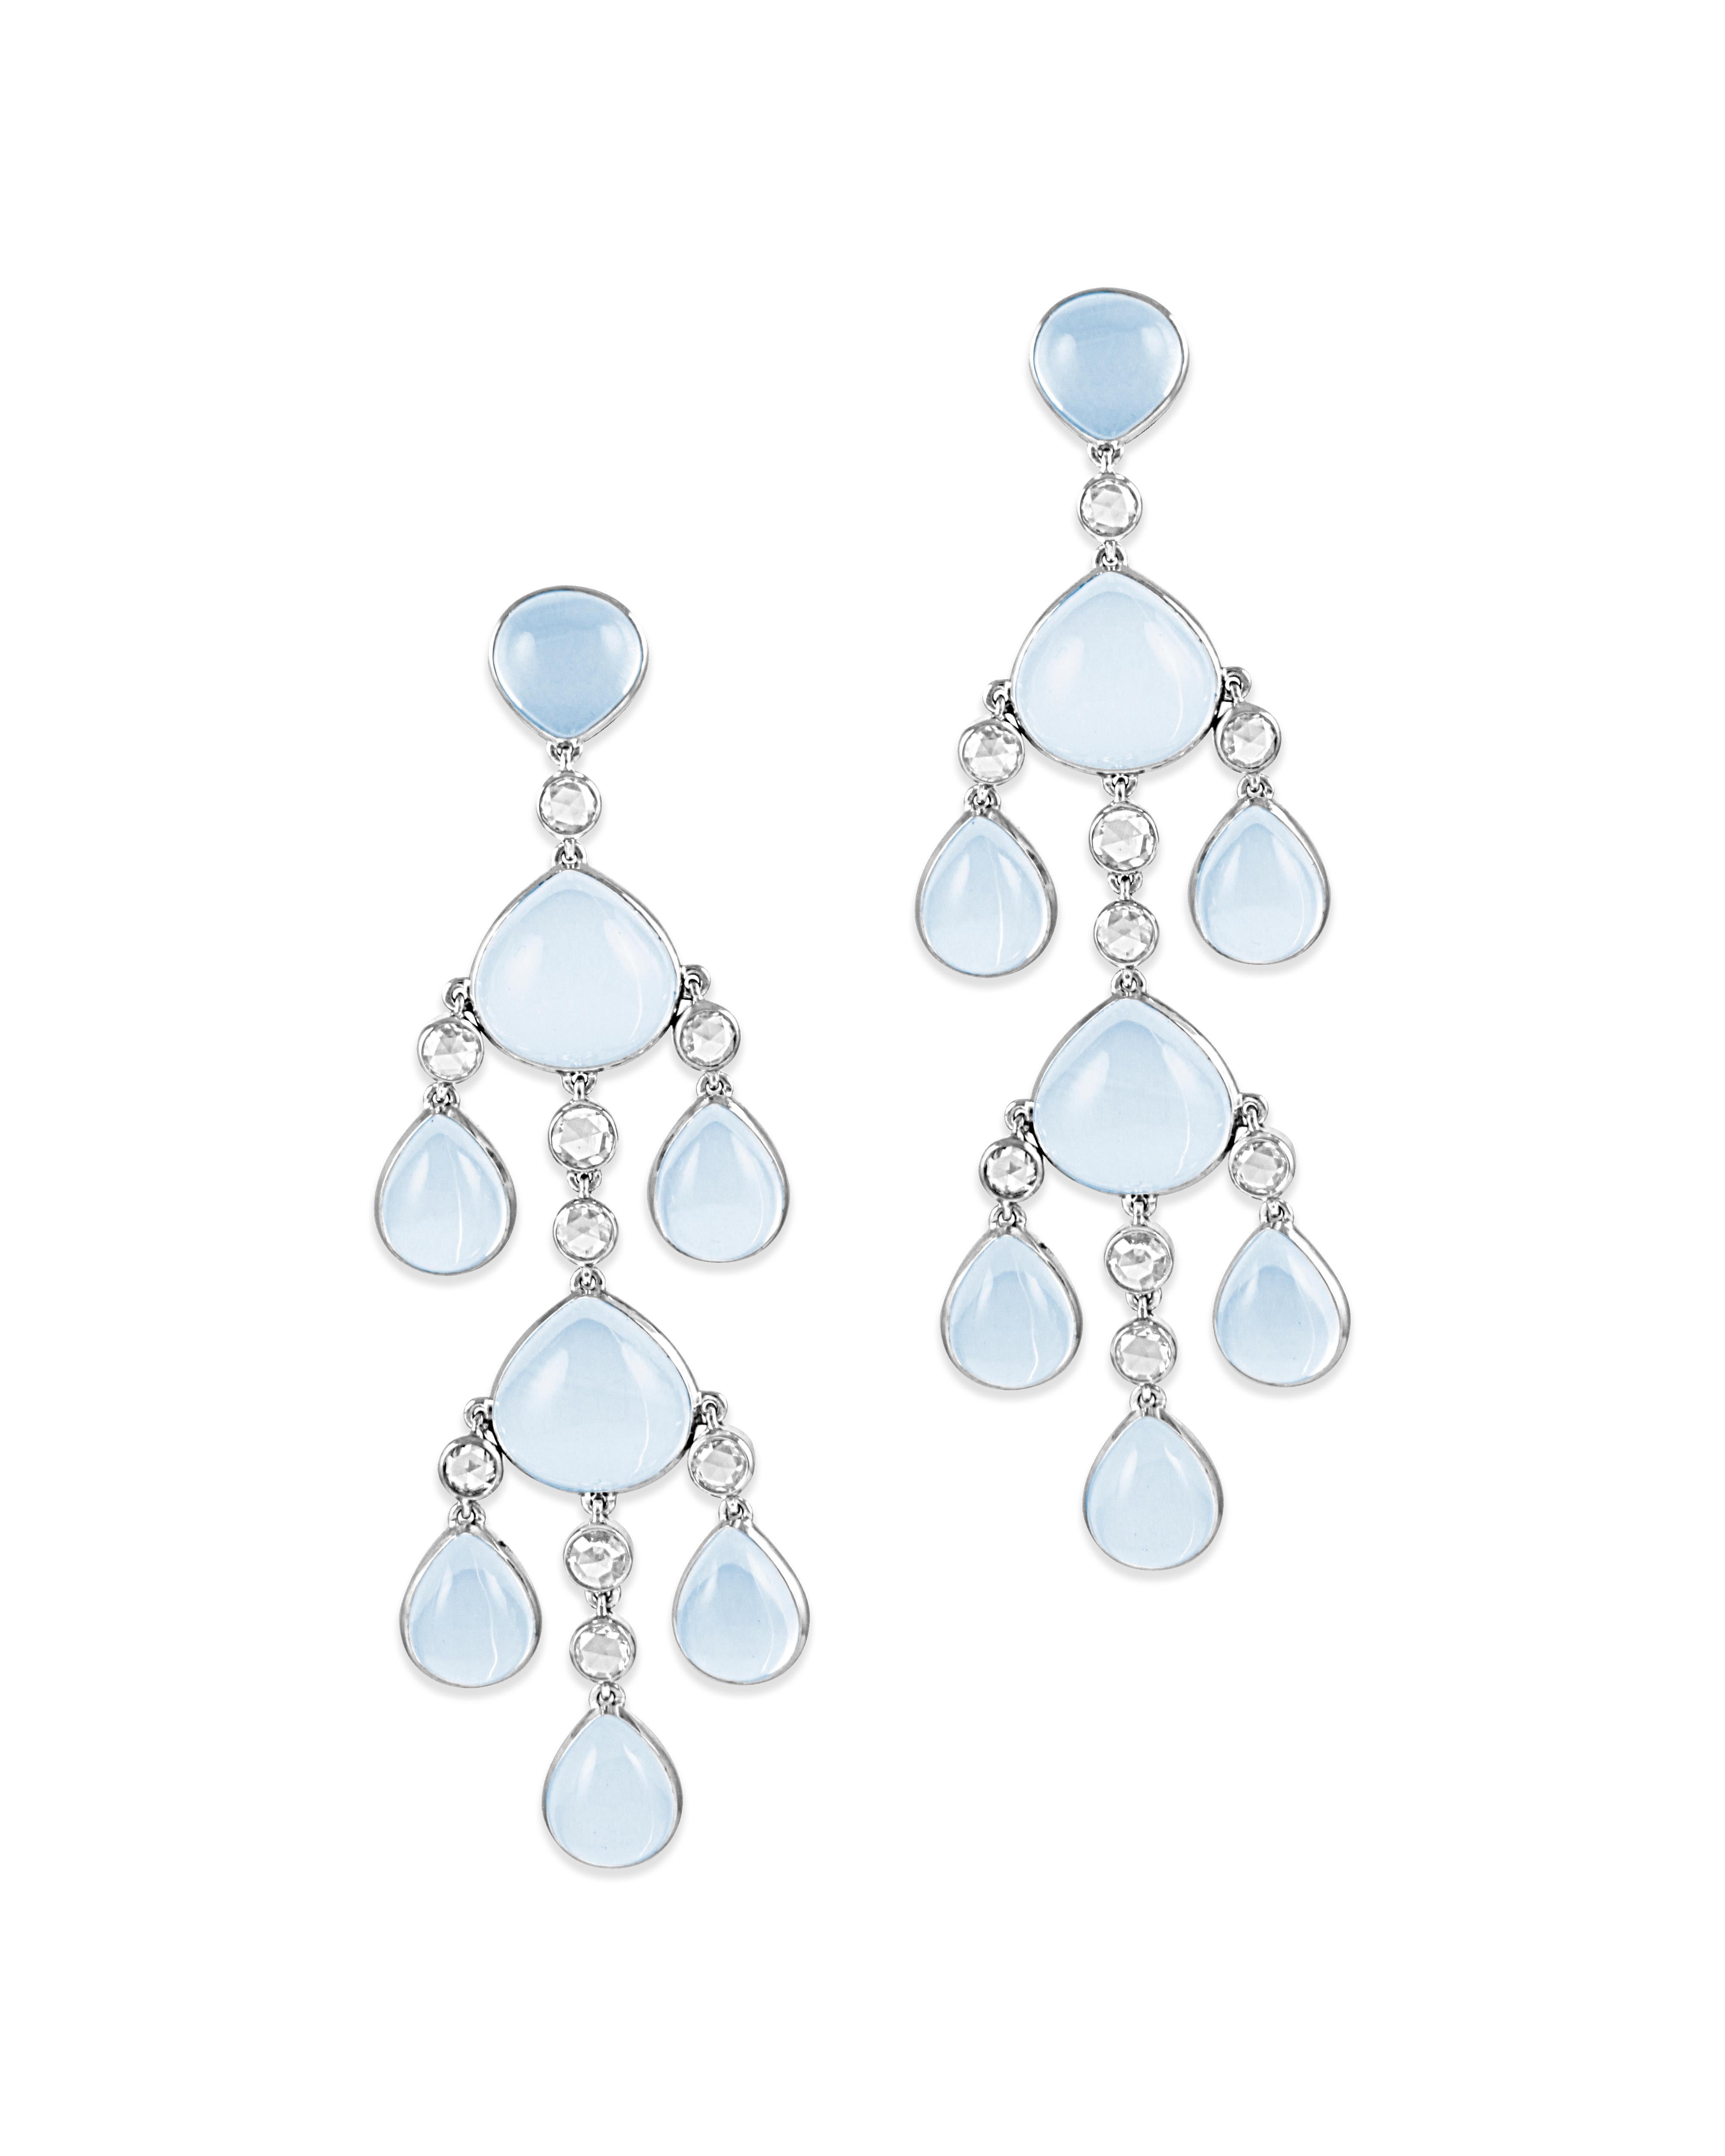 Moon Quartz Sautoir and Earrings by Siegelson, New York

A single strand sautoir with moon quartz cabochons alternating with rose-cut diamonds from which is suspended a chandelier-style pendant with moon quartz cabochons and rose-cut diamonds with